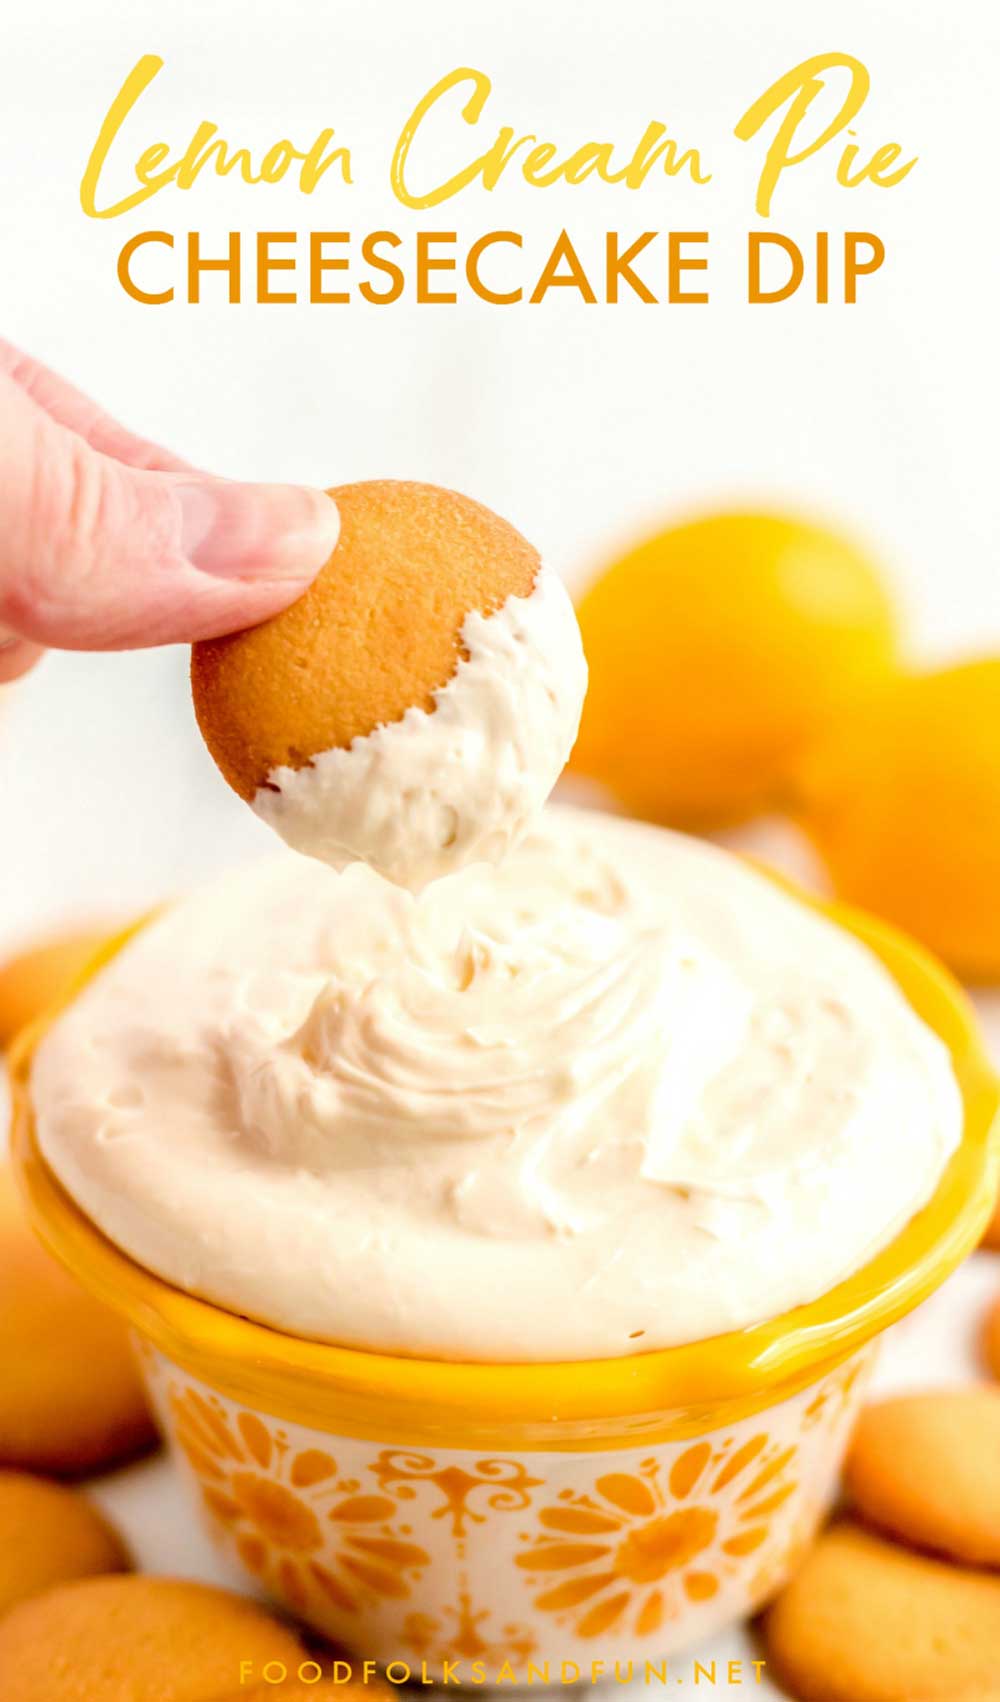 Cheesecake Dip made with lemon curd and whipped cream.